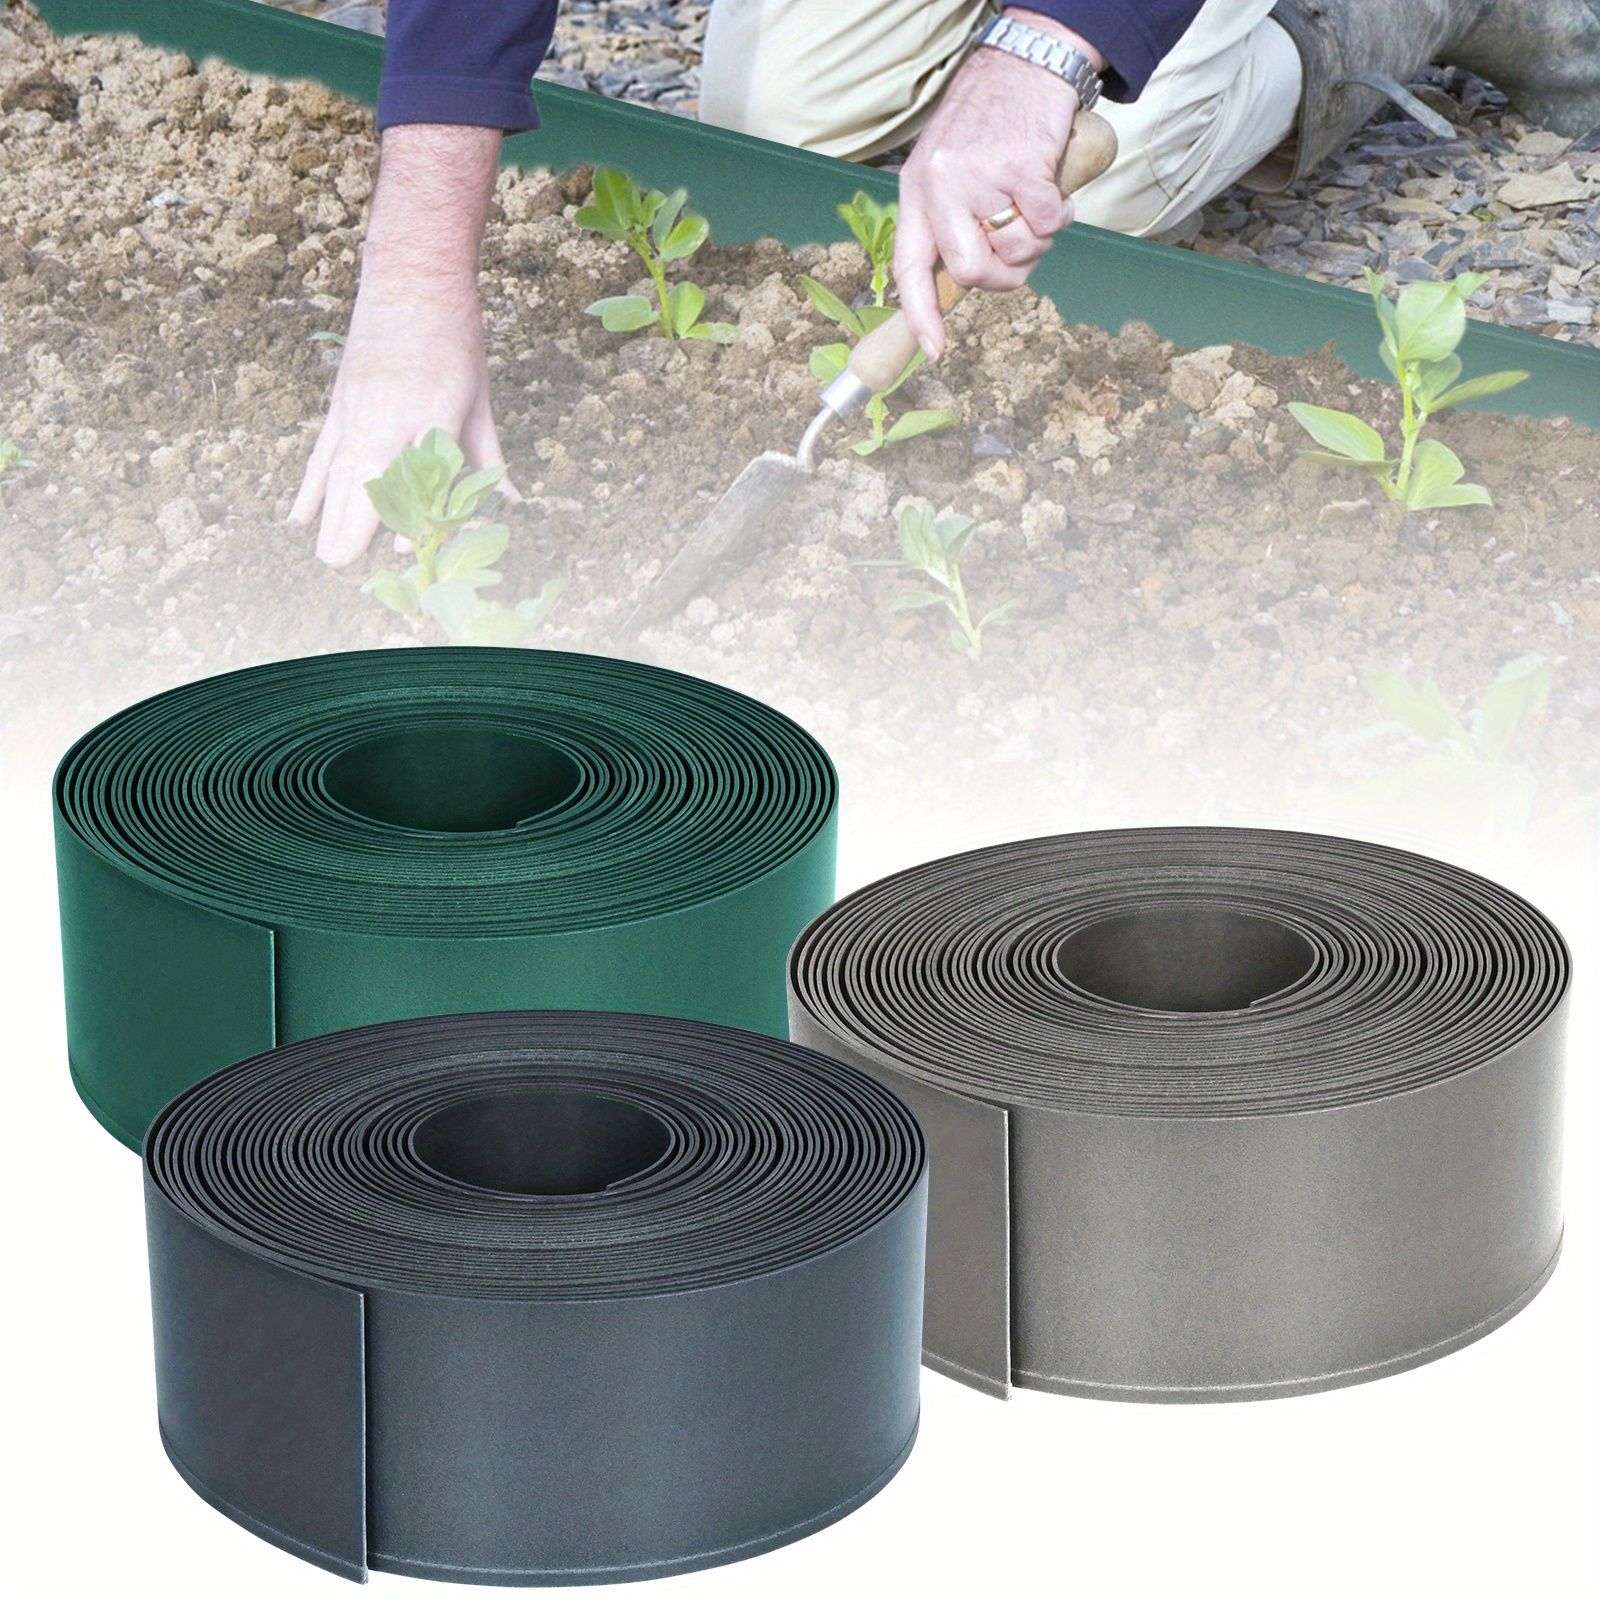 

Froadp Lawn Edging Plastic Anthracite 20m, Bed Edging, Lawn Edging Lawn Edging Mowing Edge, Easy To Process